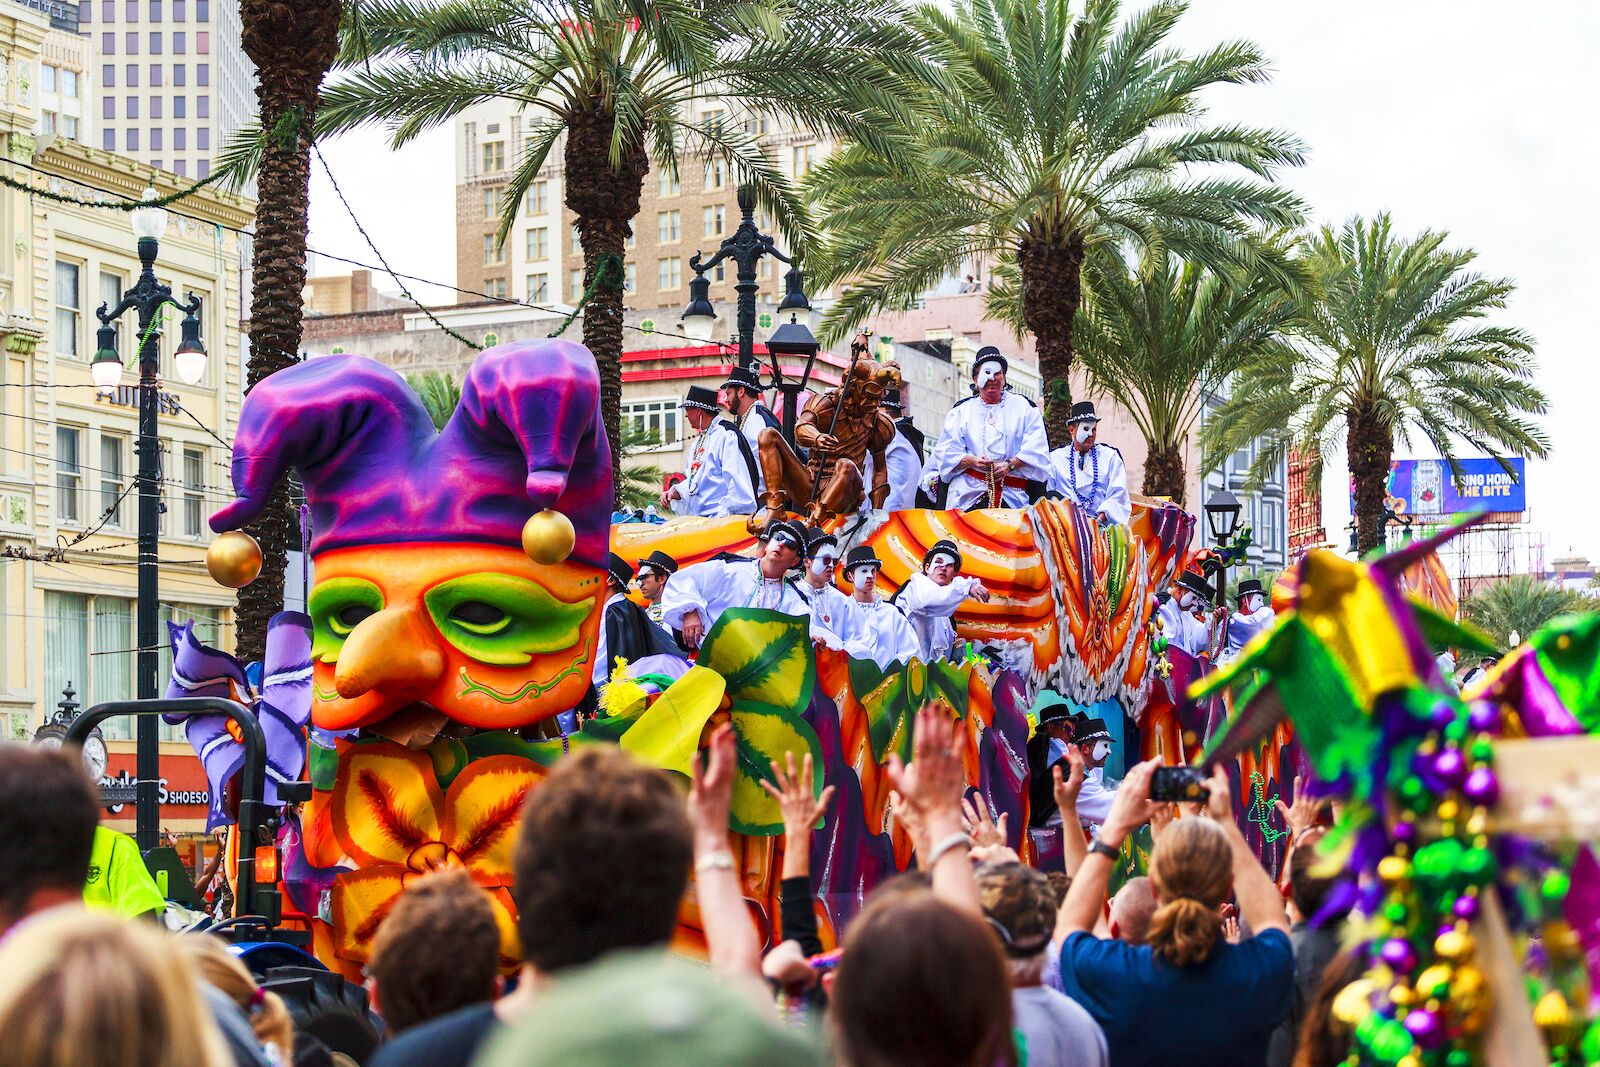 New Orleans' Mardi Gras parades with people dressed up and floats handing out goods and beads